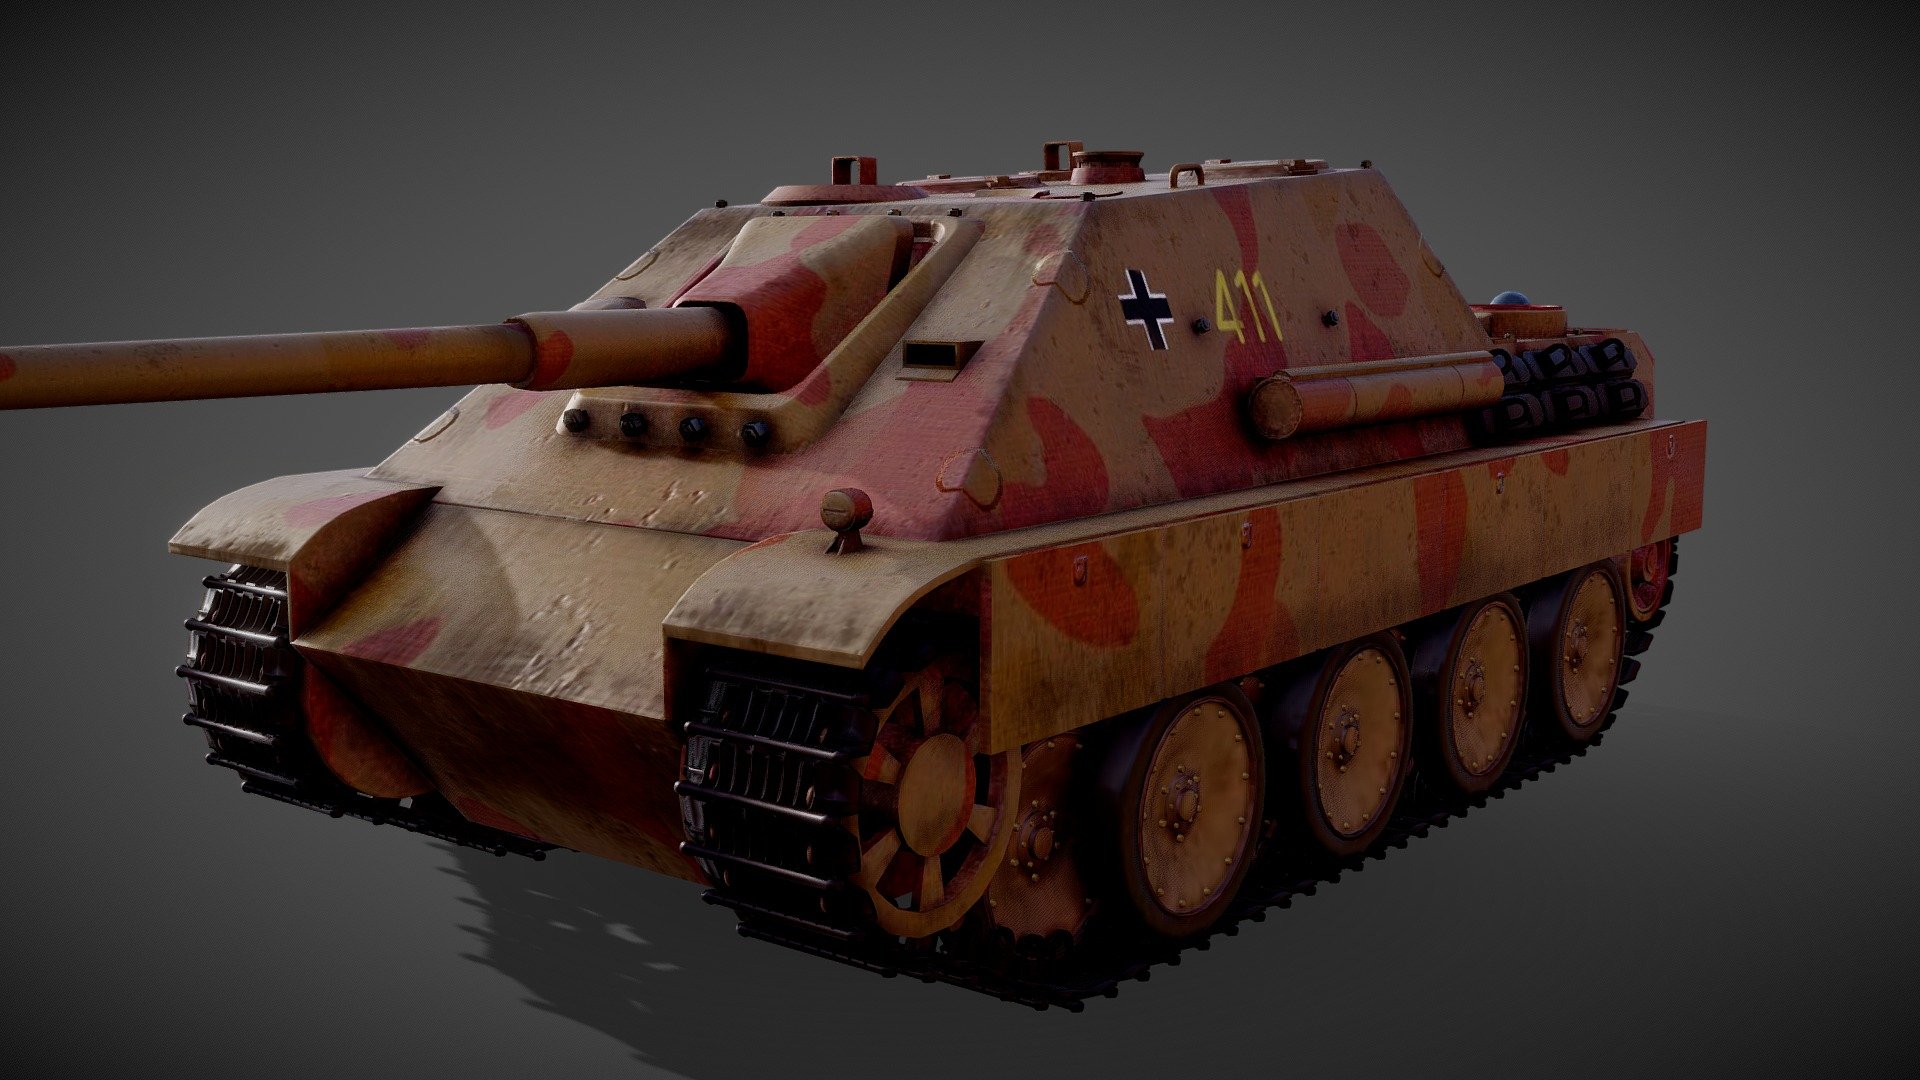 Decided to make a vehicle for a change. This is also the first tank I've ever made.

The Jagdpanther is a german tank destroyer from the second world war. It entered service in 1944 during the later stages of the war on the Eastern and Western Fronts. Apparently this tank was also used by the French after the war for some time 3d model